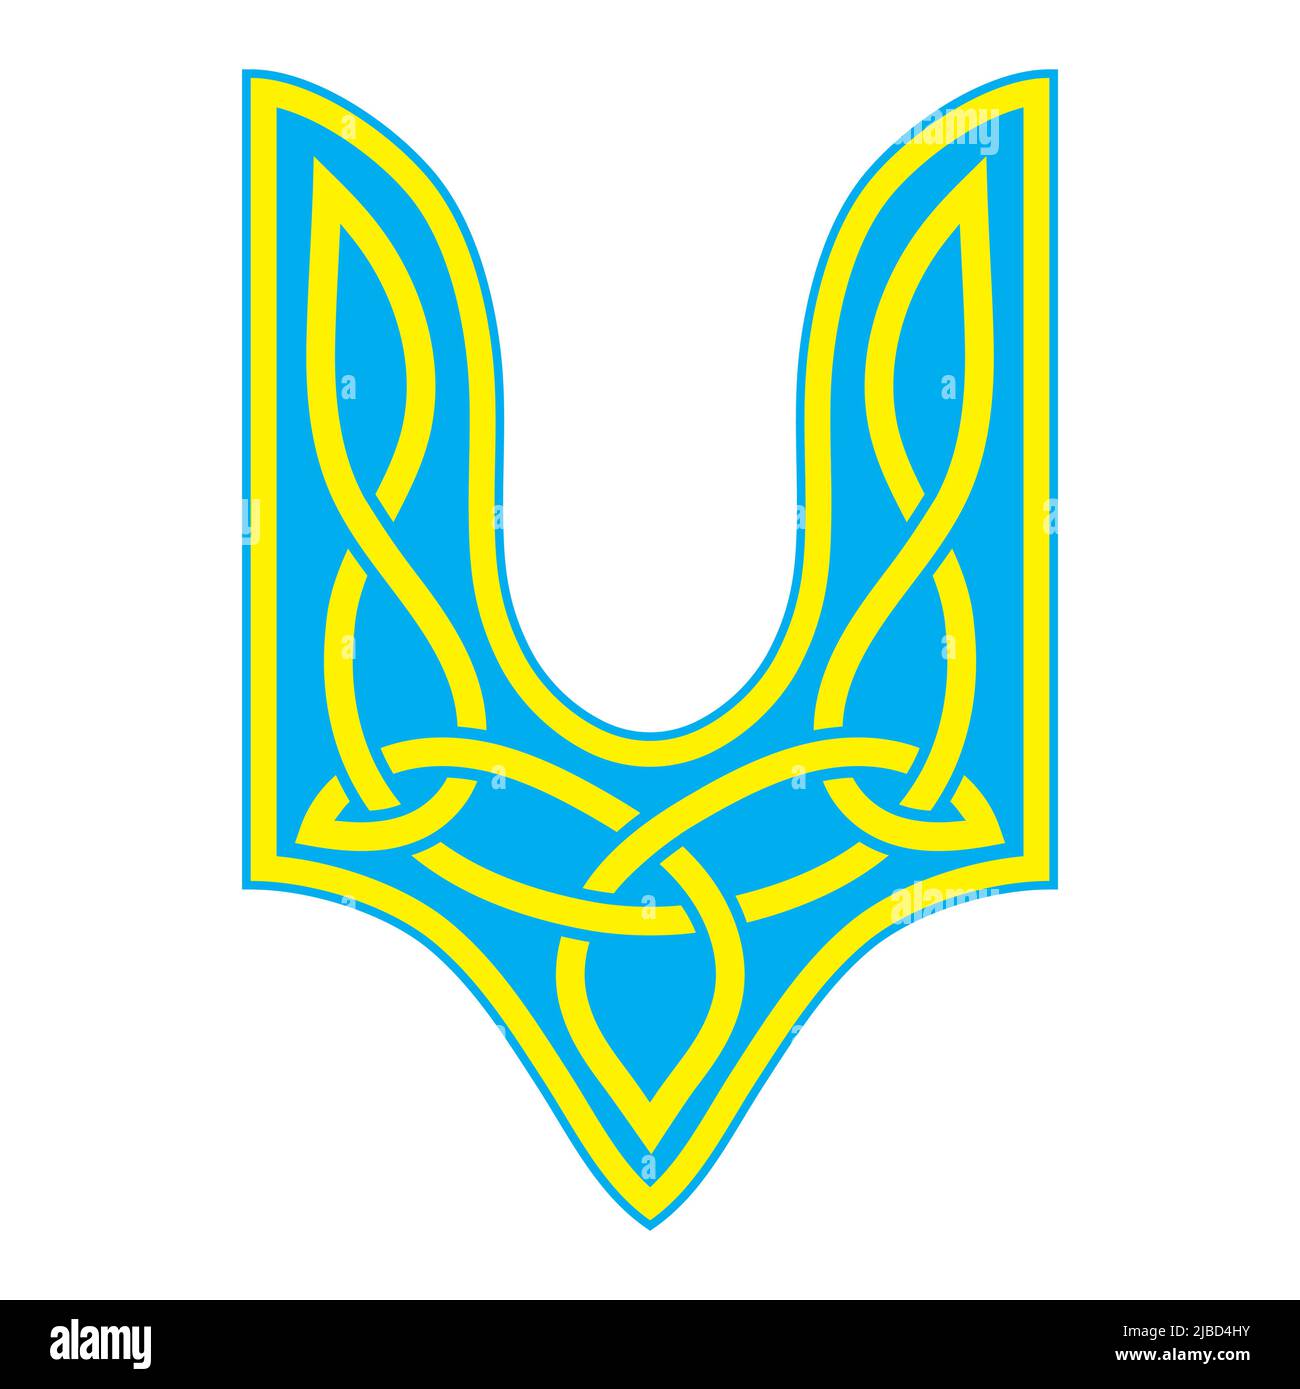 Design with the Trident - the main element of the state emblem of Ukraine in the form of a golden trident of a special shape on a blue field. Stock Vector